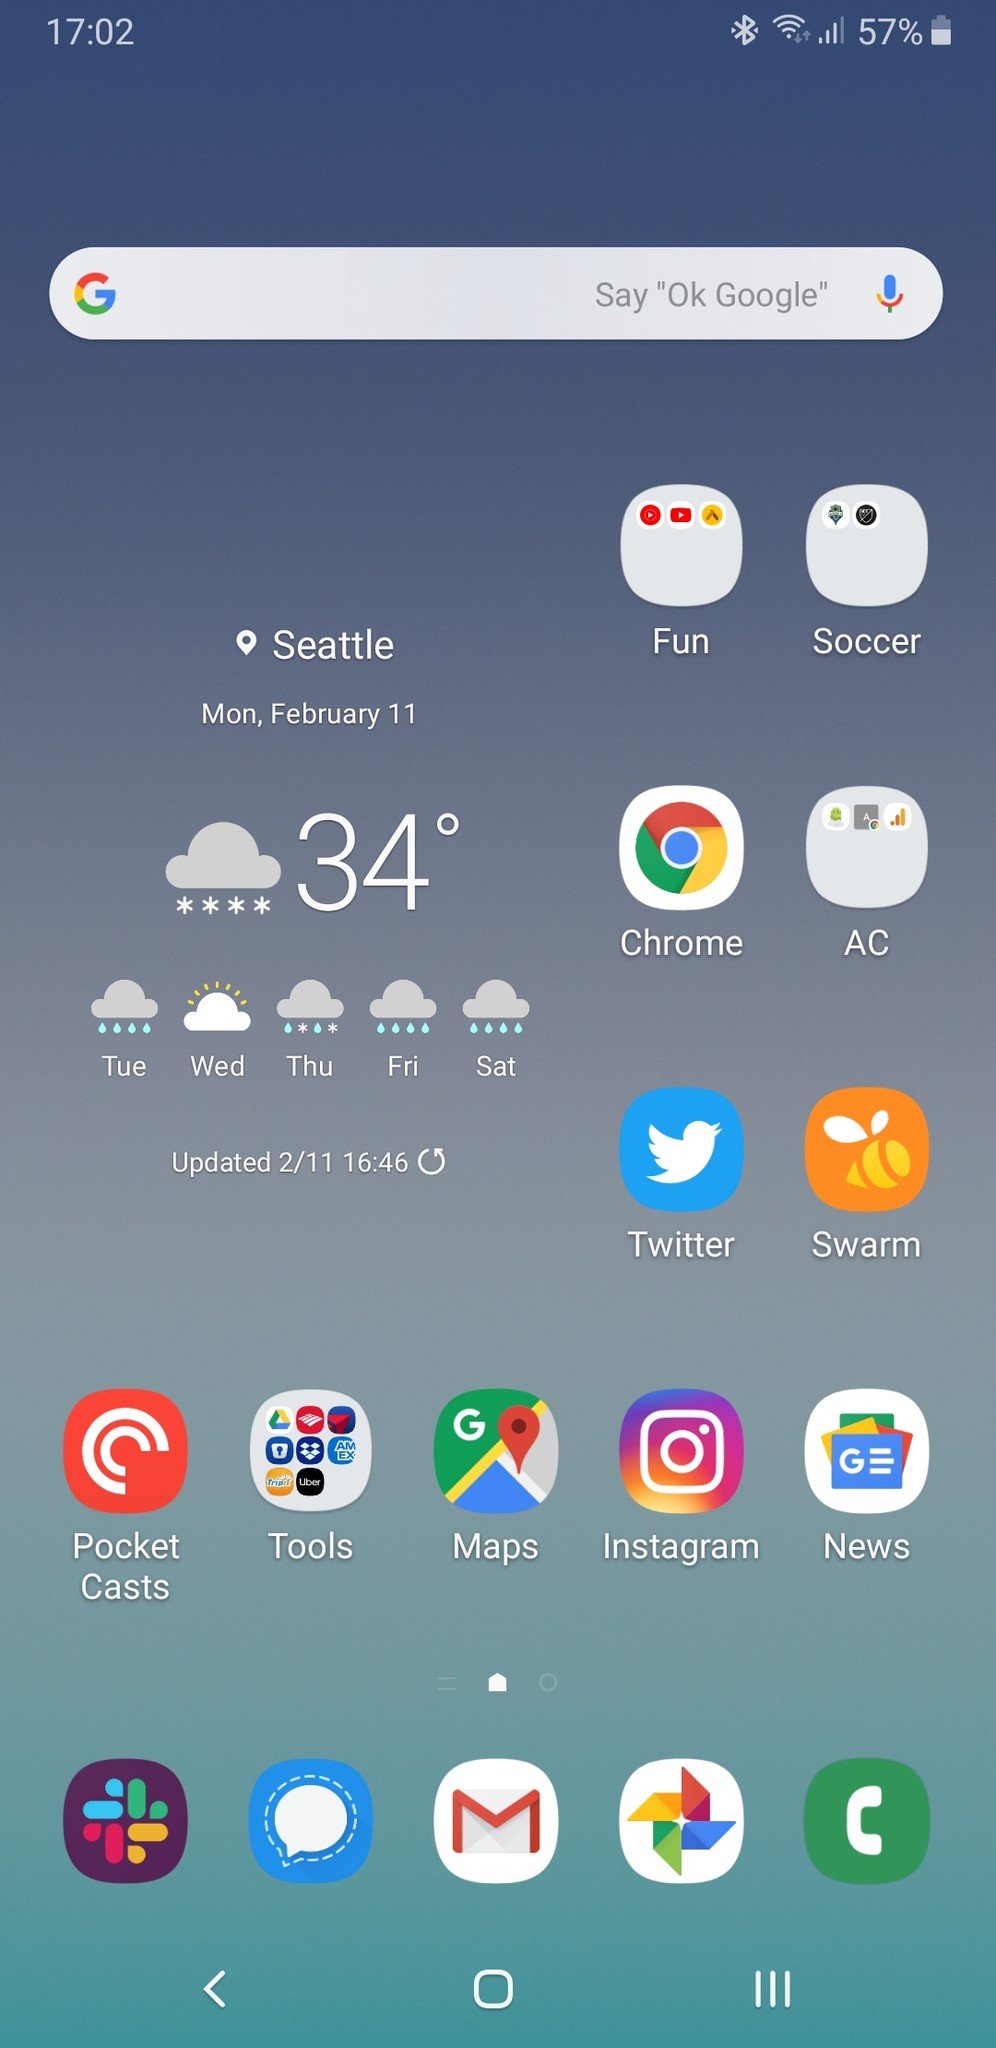 Samsung One UI (Android 9 Pie) review: Samsung's best software yet